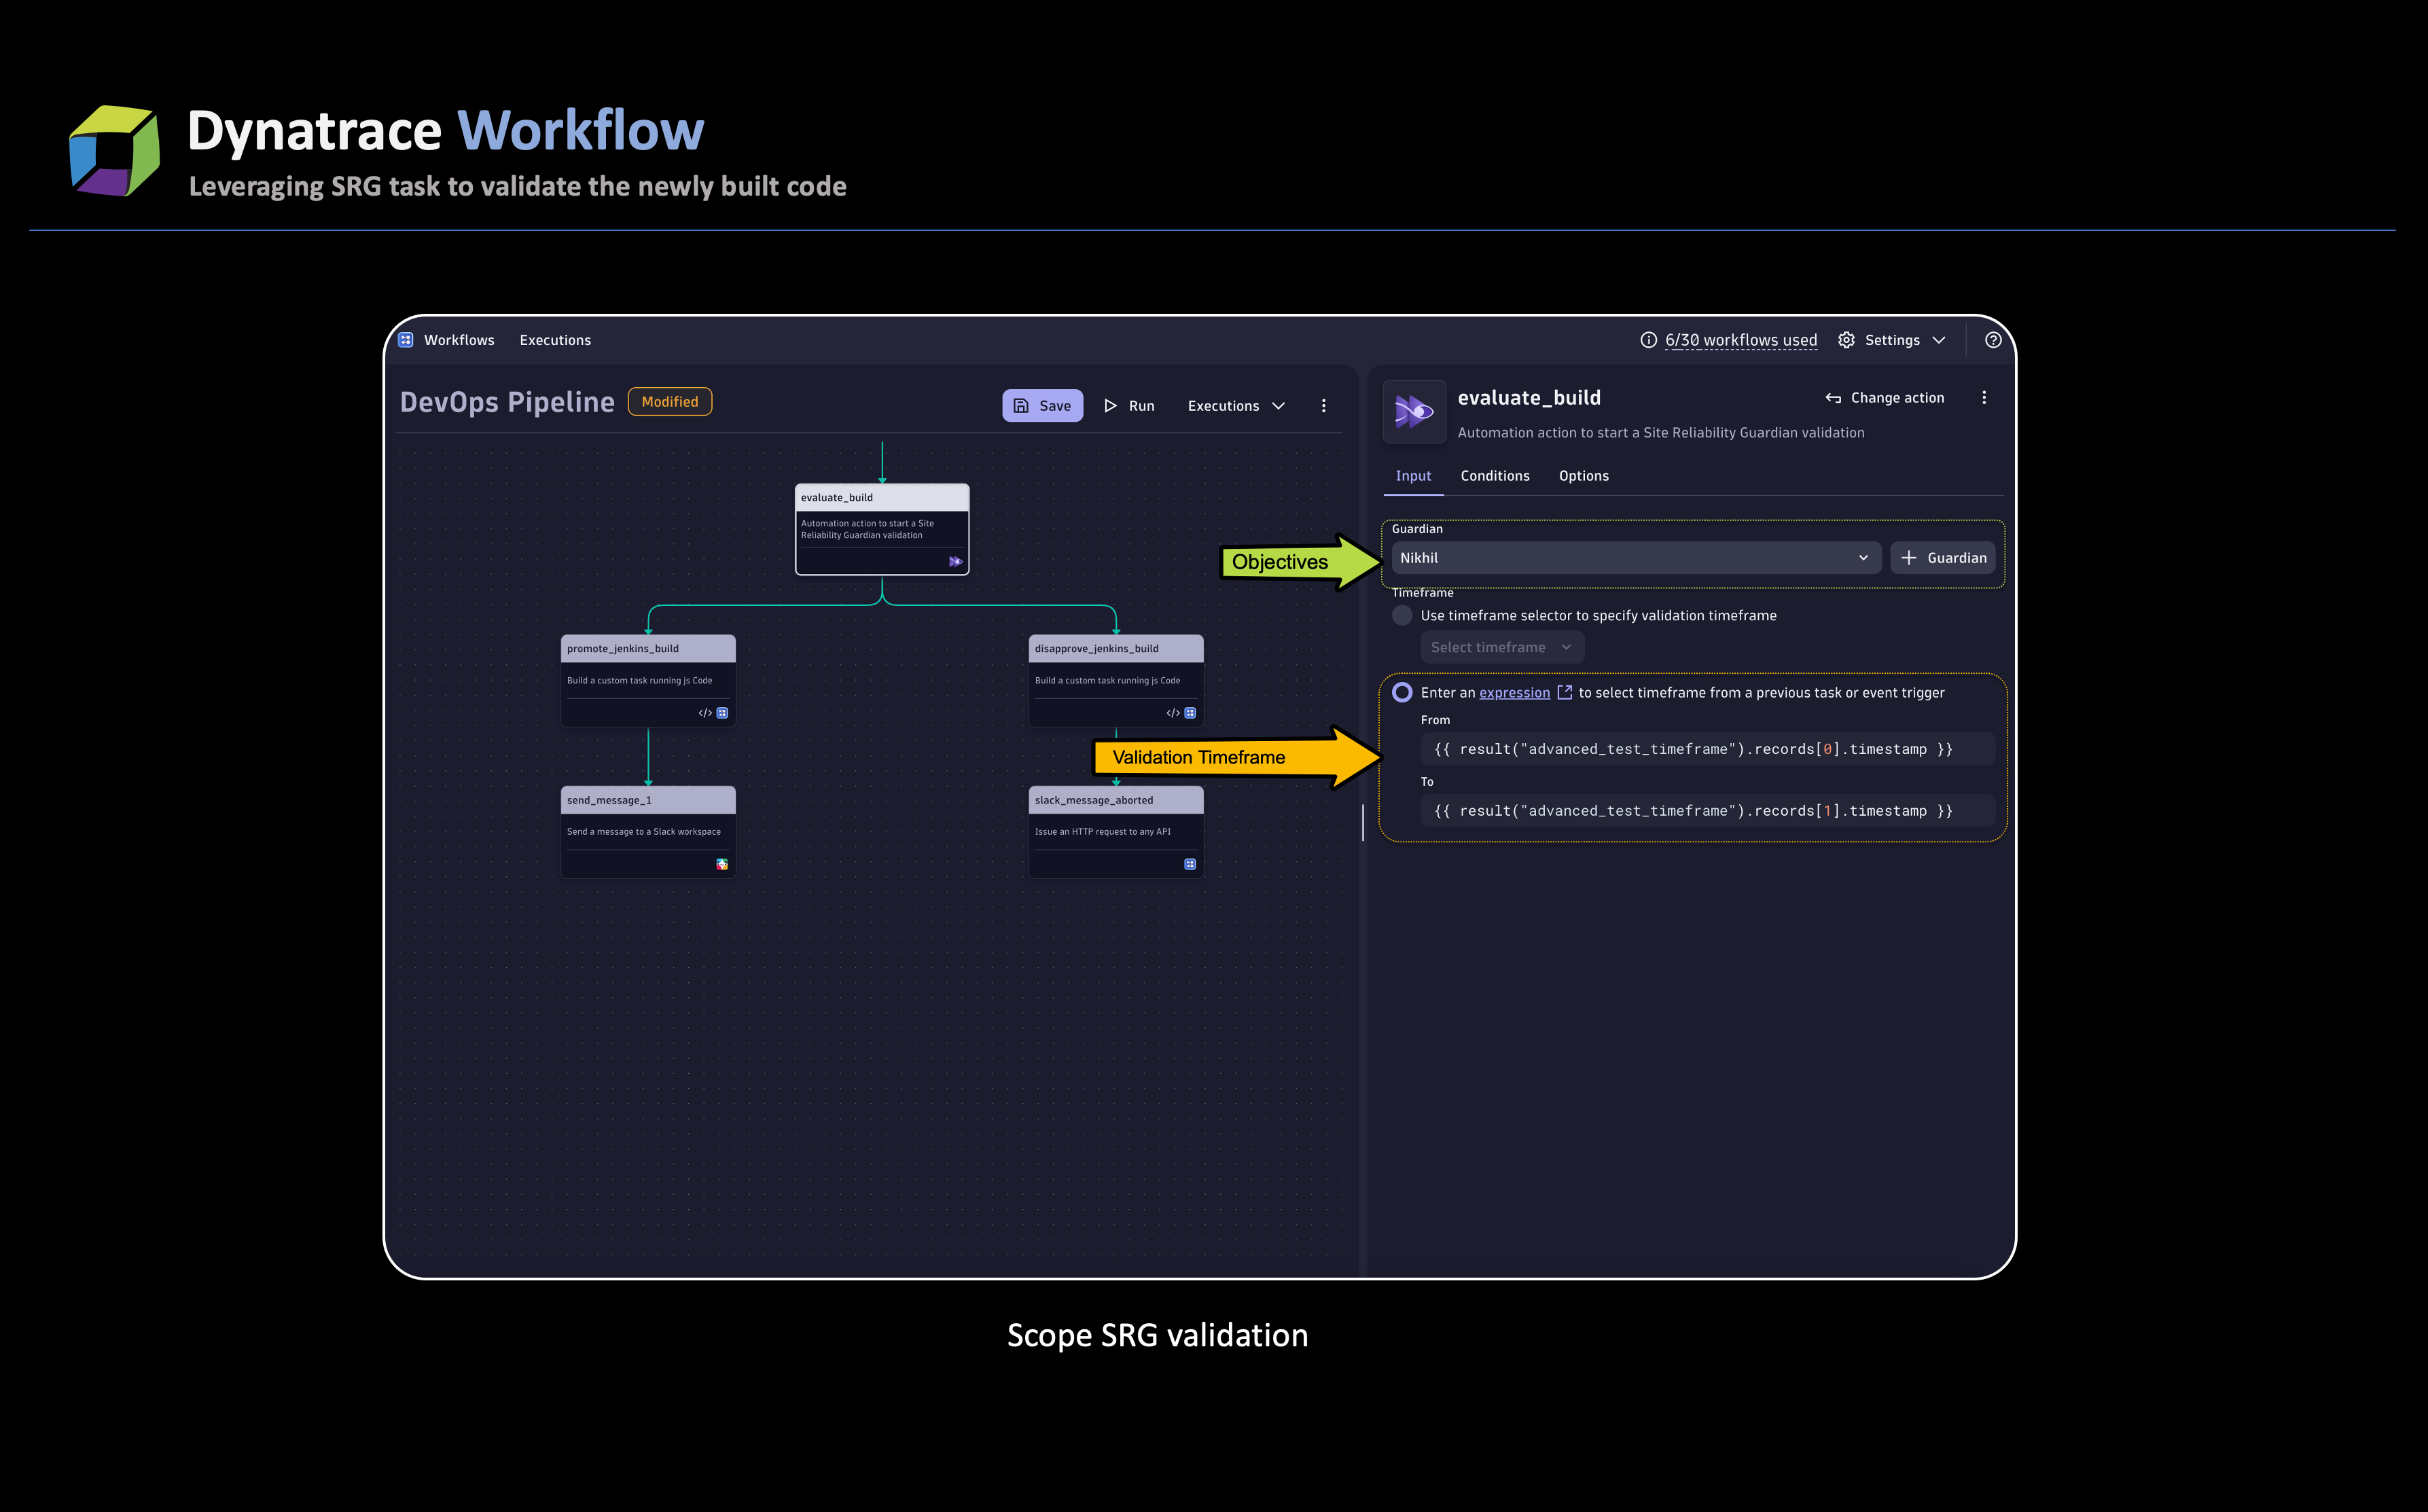 Leveraging SRG task to validate the newly build code with Dynatrace Workflow